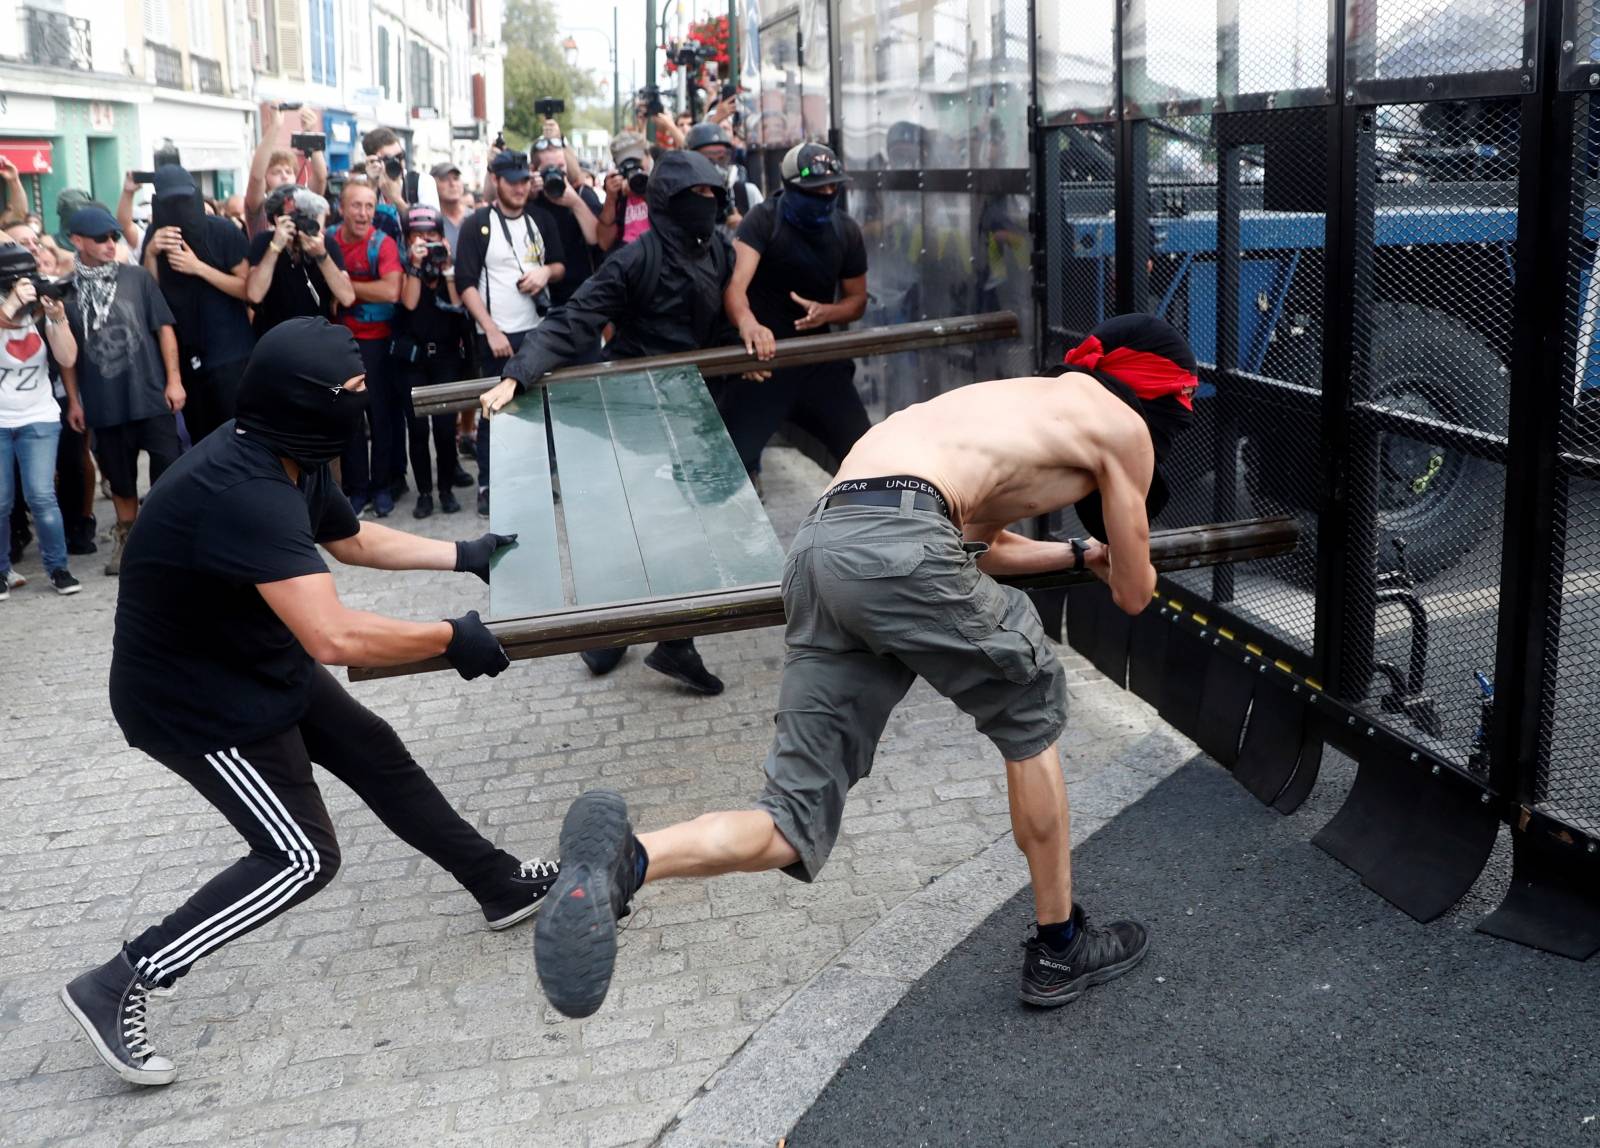 Demonstrators use a part of a barricade to attack the police blockade during a protest against G7 summit, in Bayonne